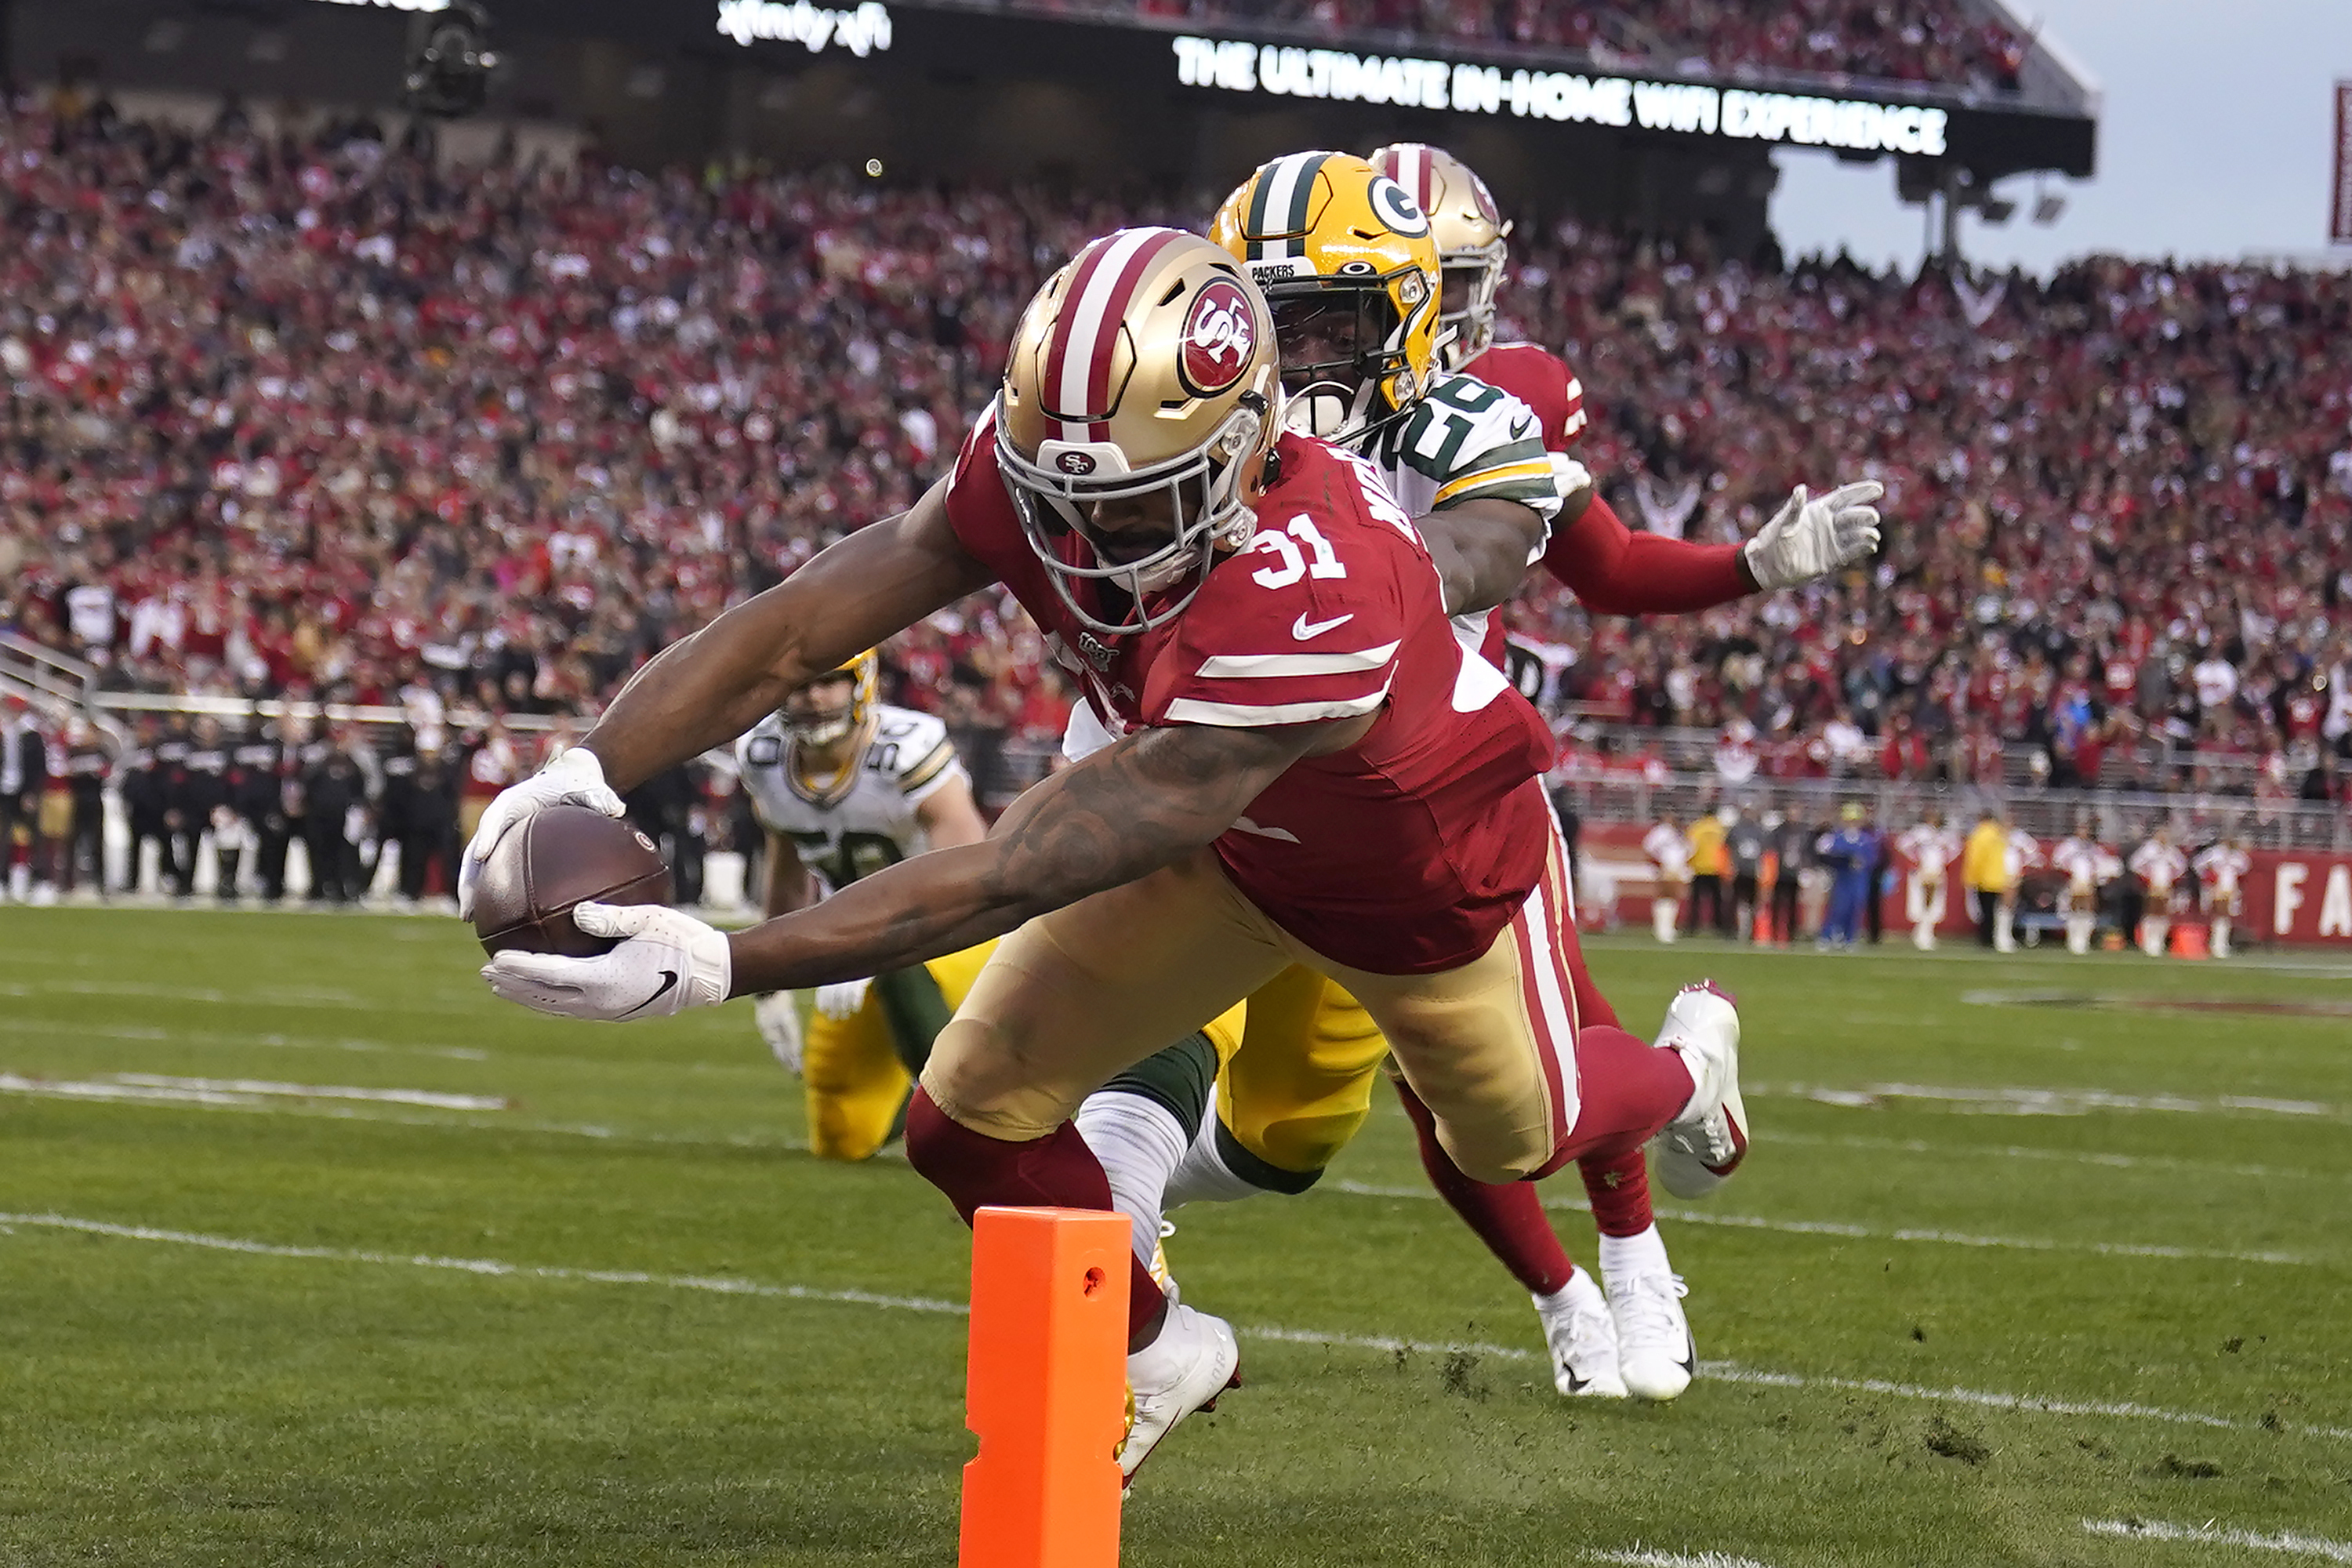 San Francisco 49ers advance to Super Bowl 54 after dominant win